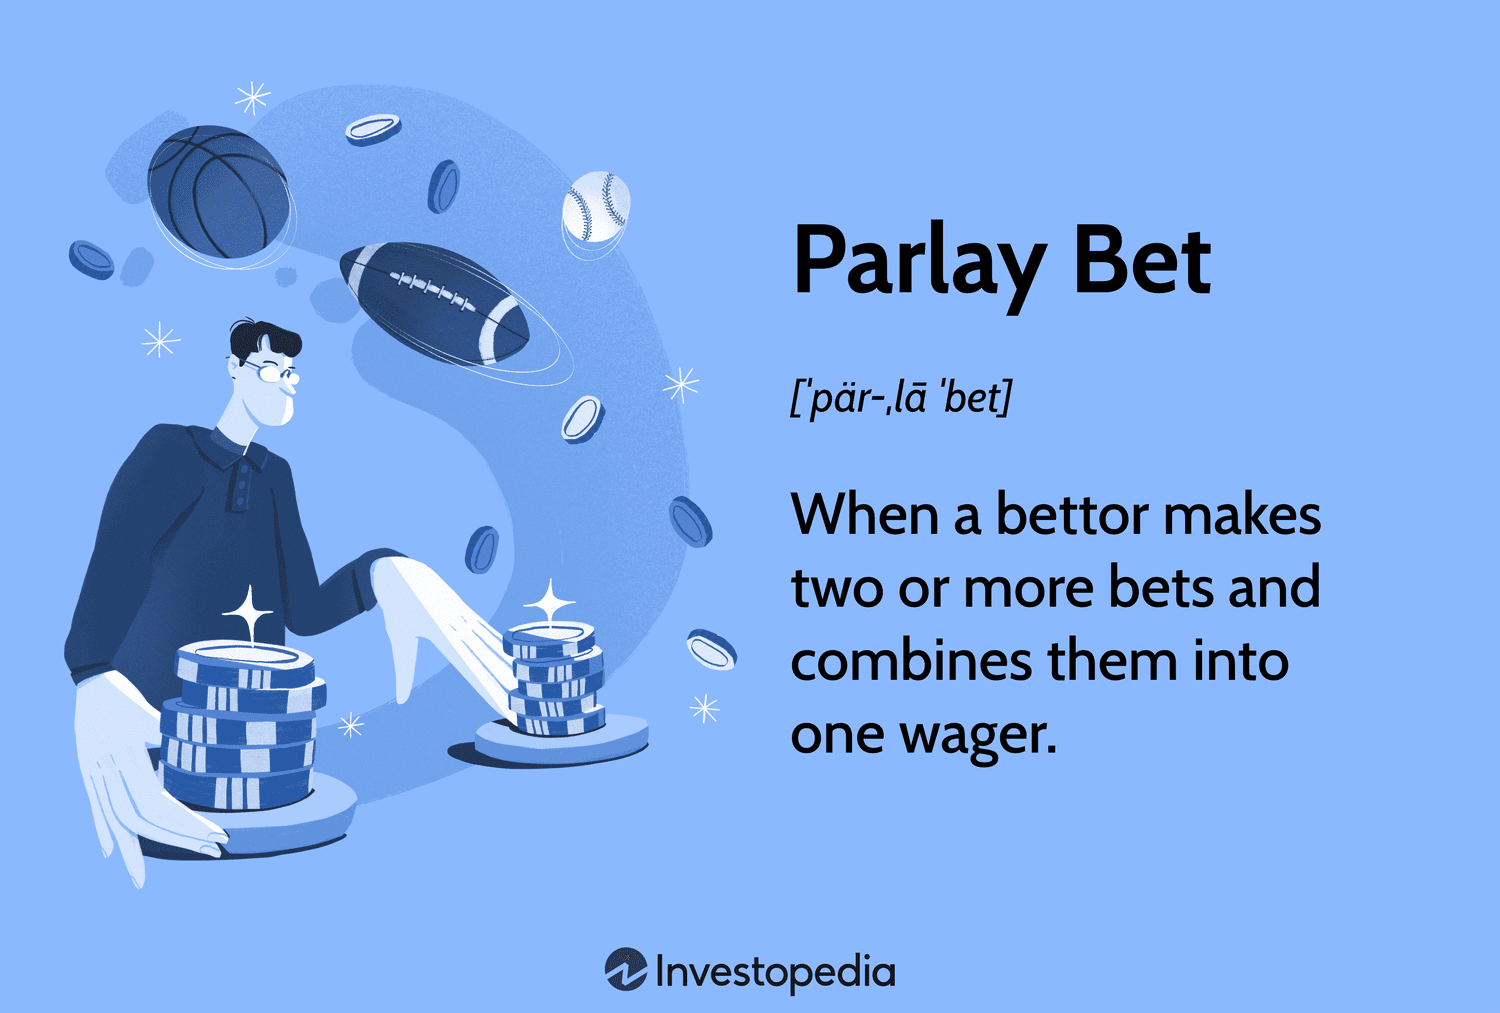 Photo: how does a parlay work in sports betting